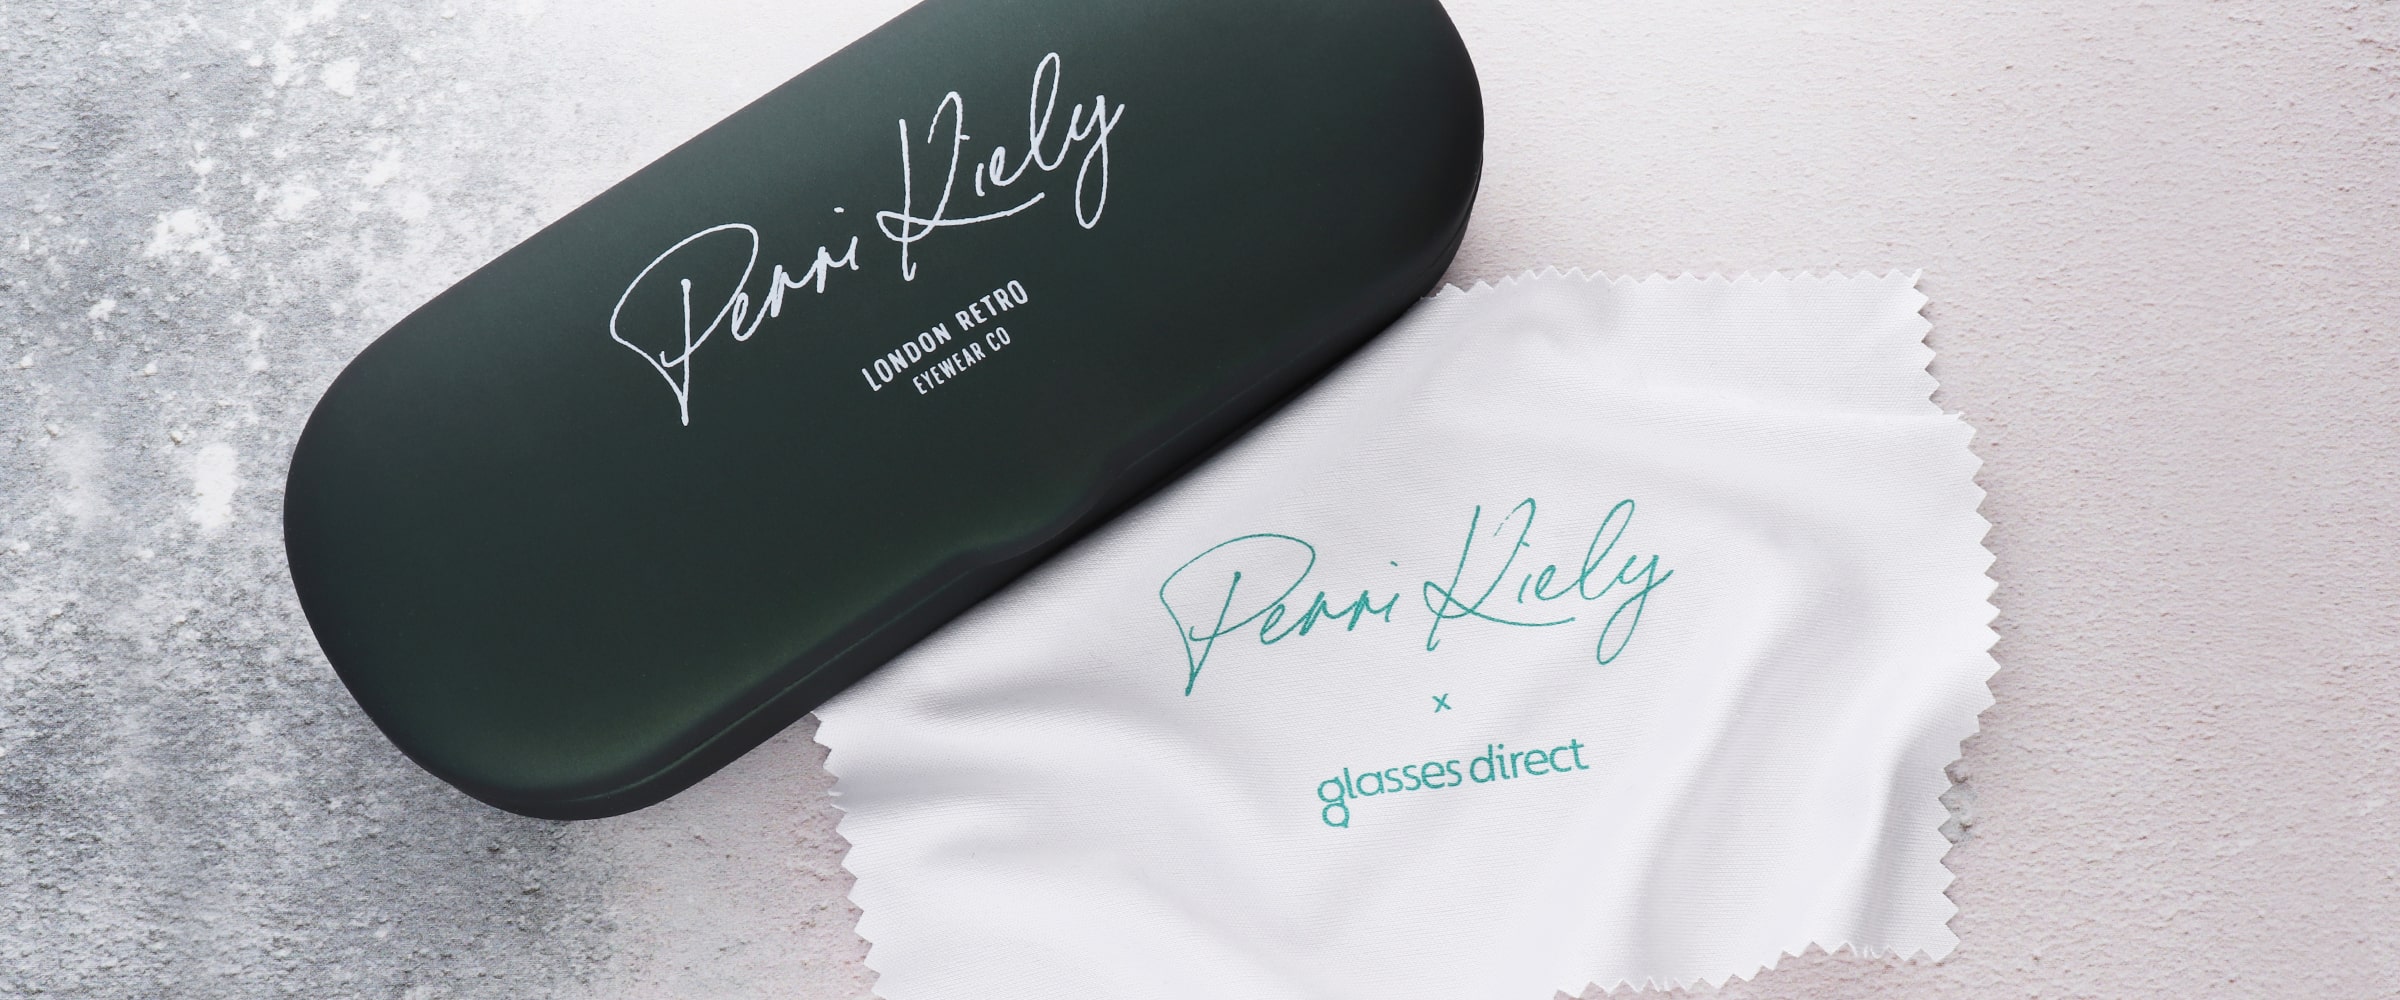 Perri Kiely x LR Collection- Case and cloth